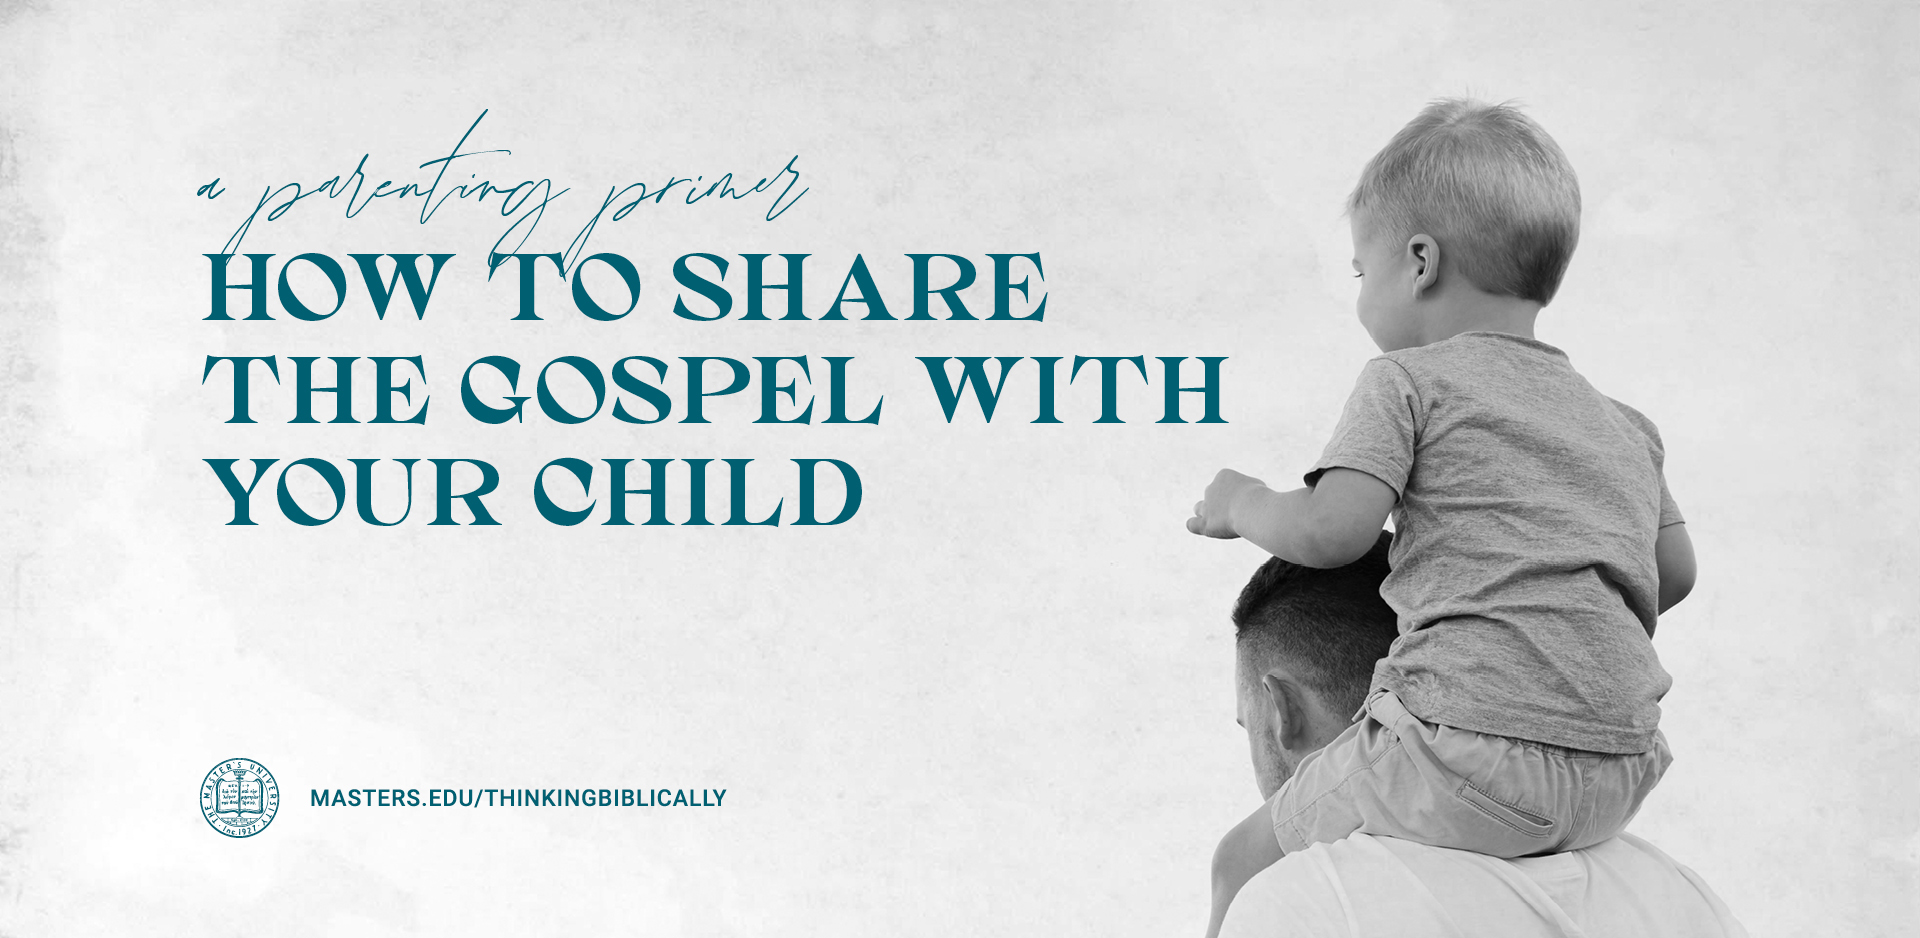 How To Share the Gospel with Your Child